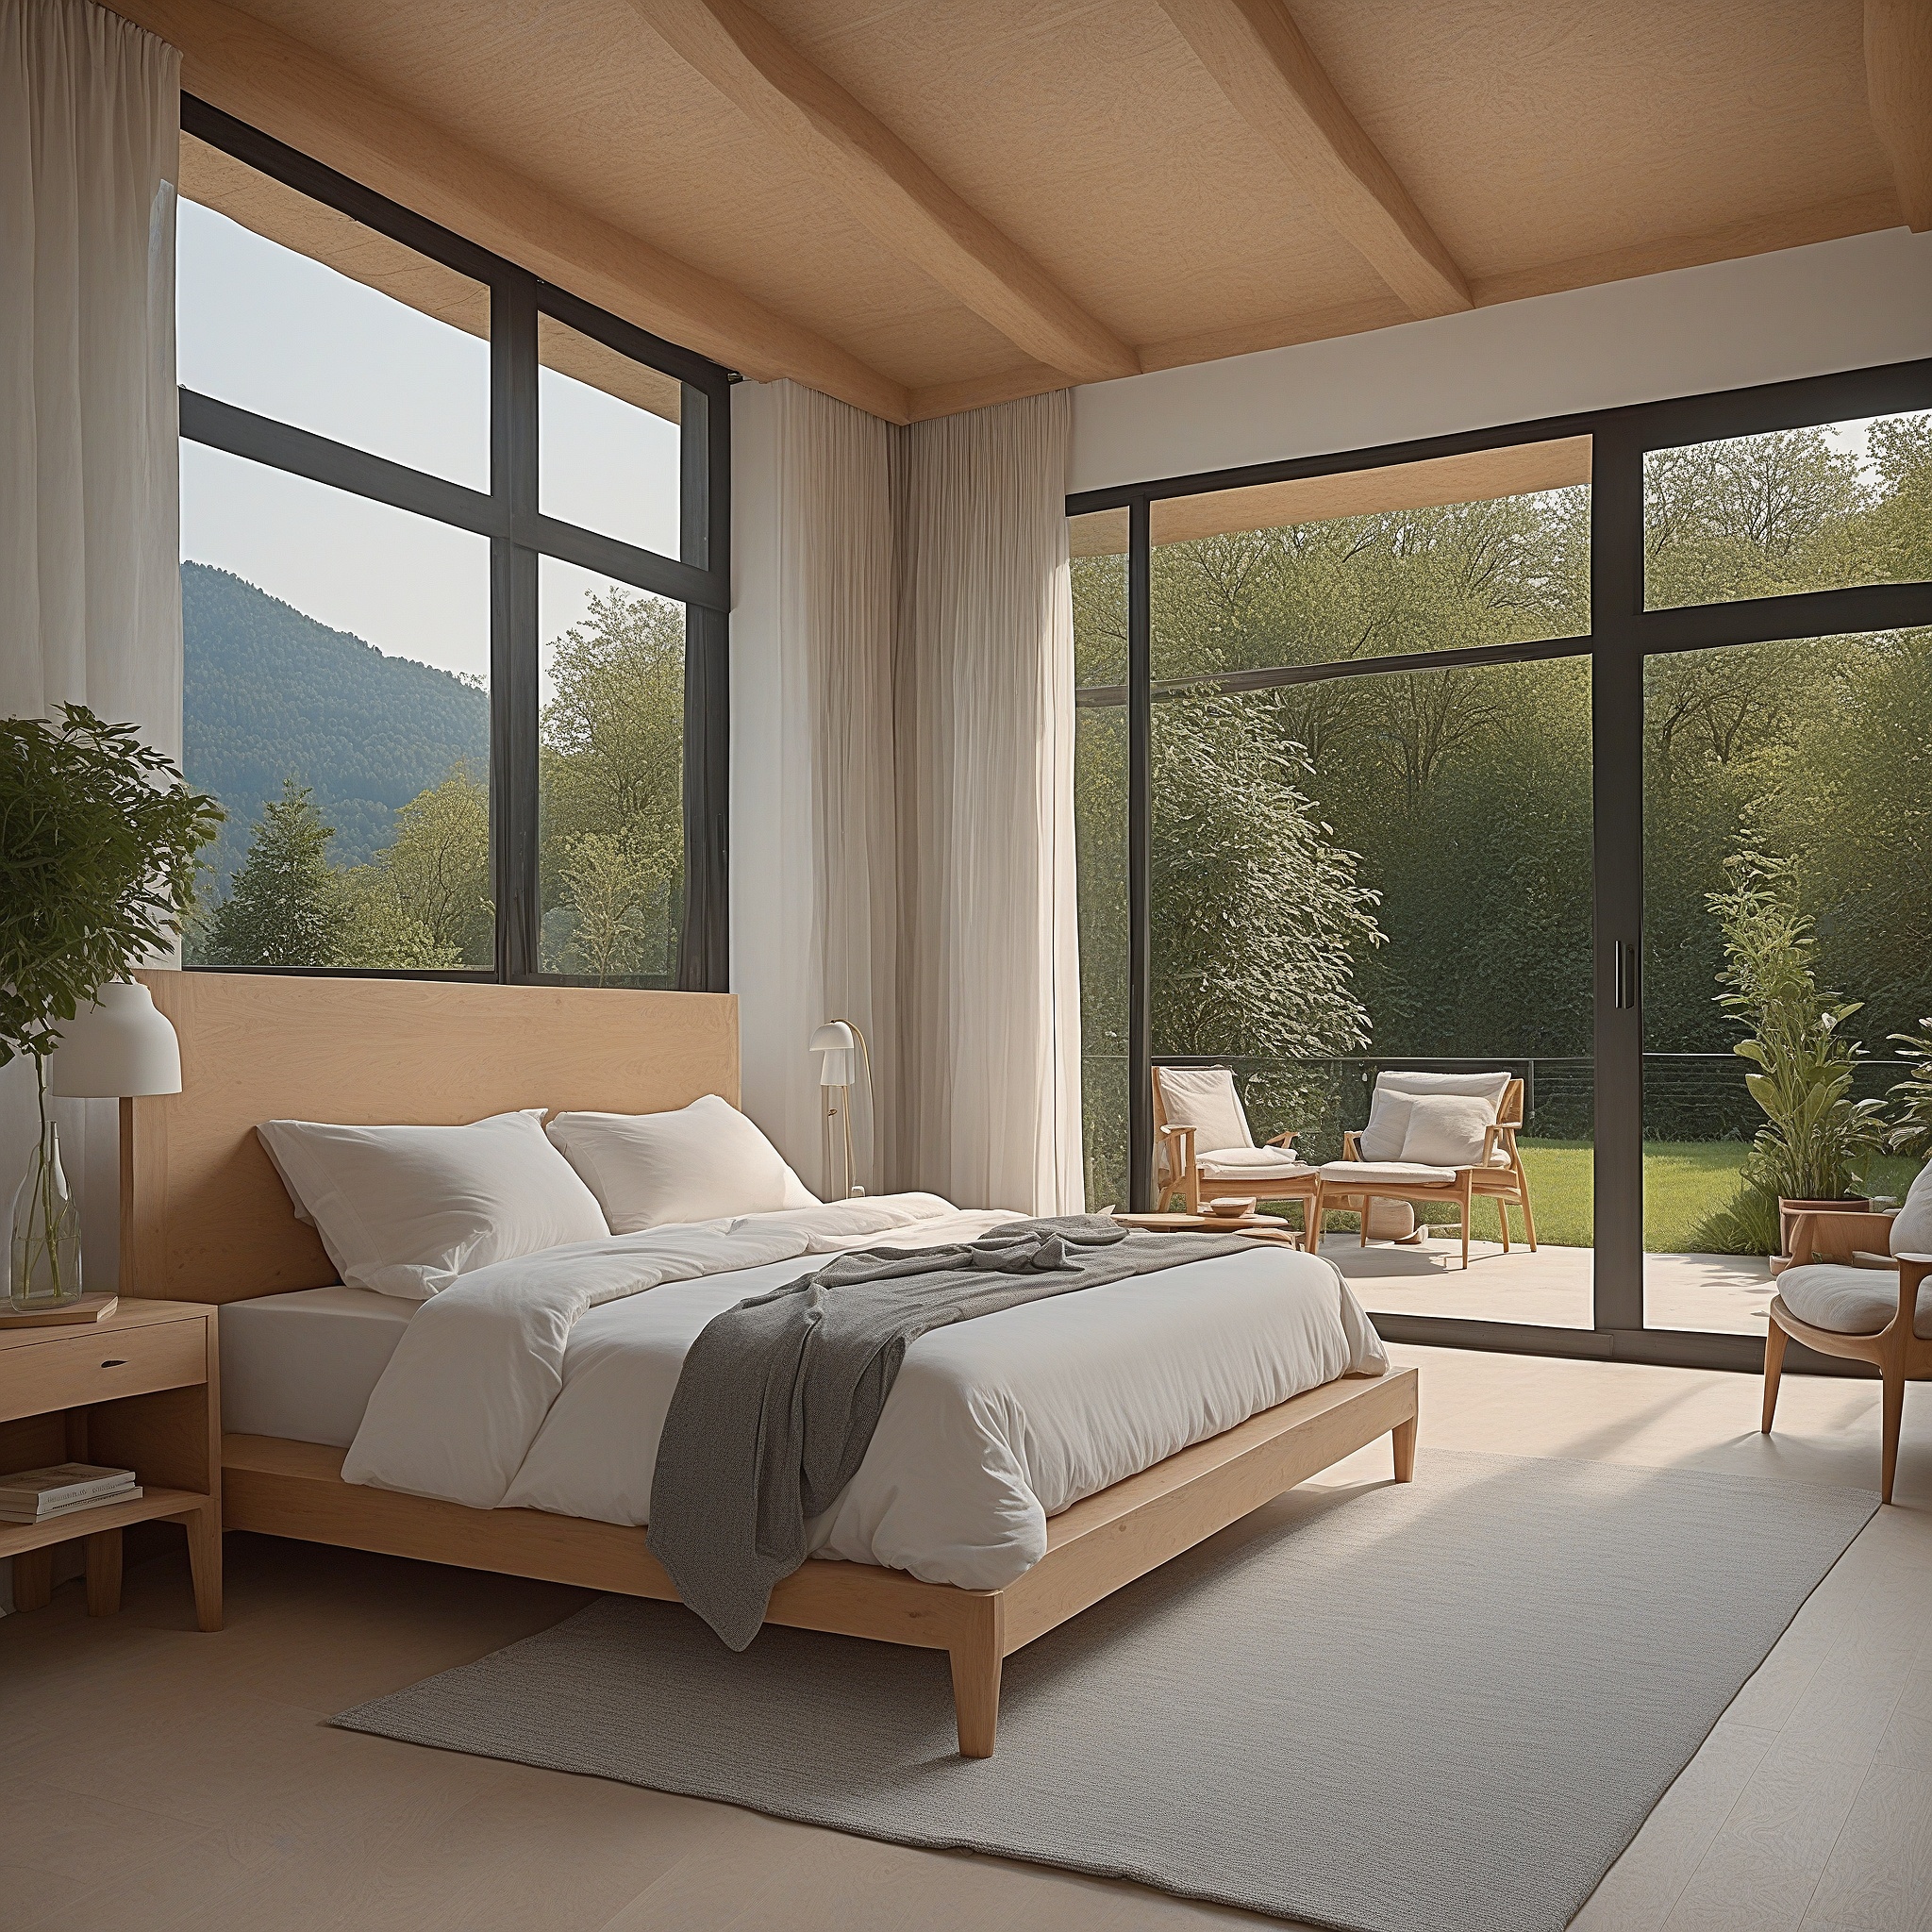 Scandinavian Master BEdroom With White Covers And Light Wood Furniture